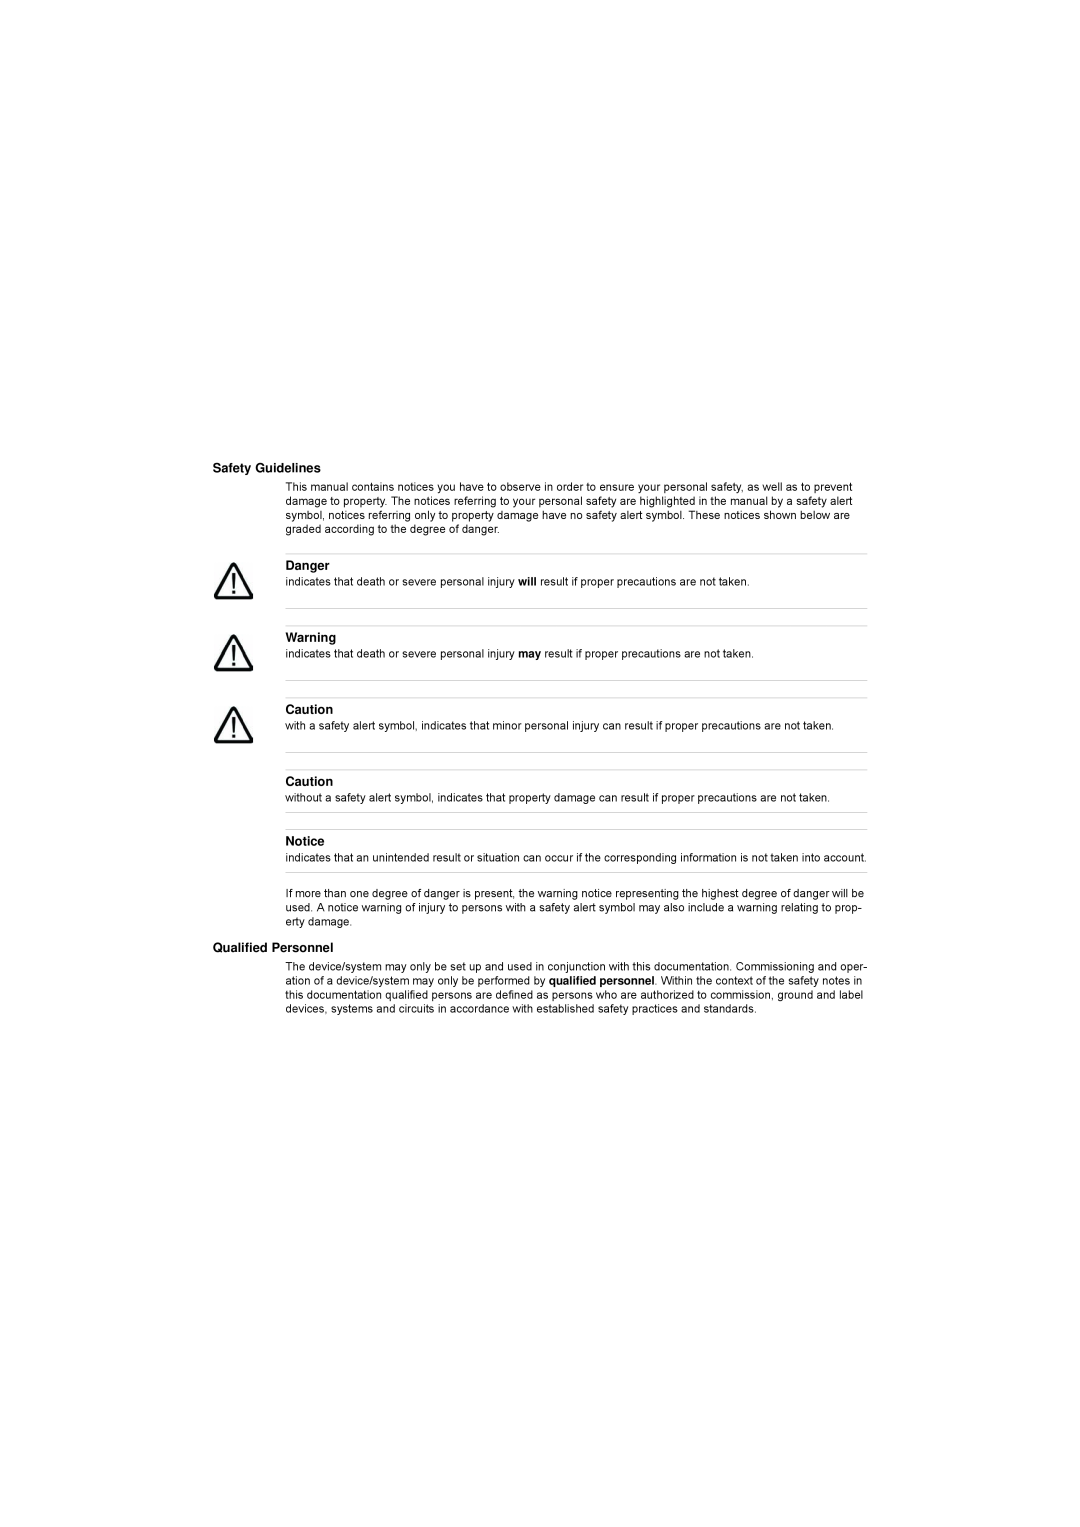 Siemens S7-300 manual Safety Guidelines, Danger, Qualified Personnel 